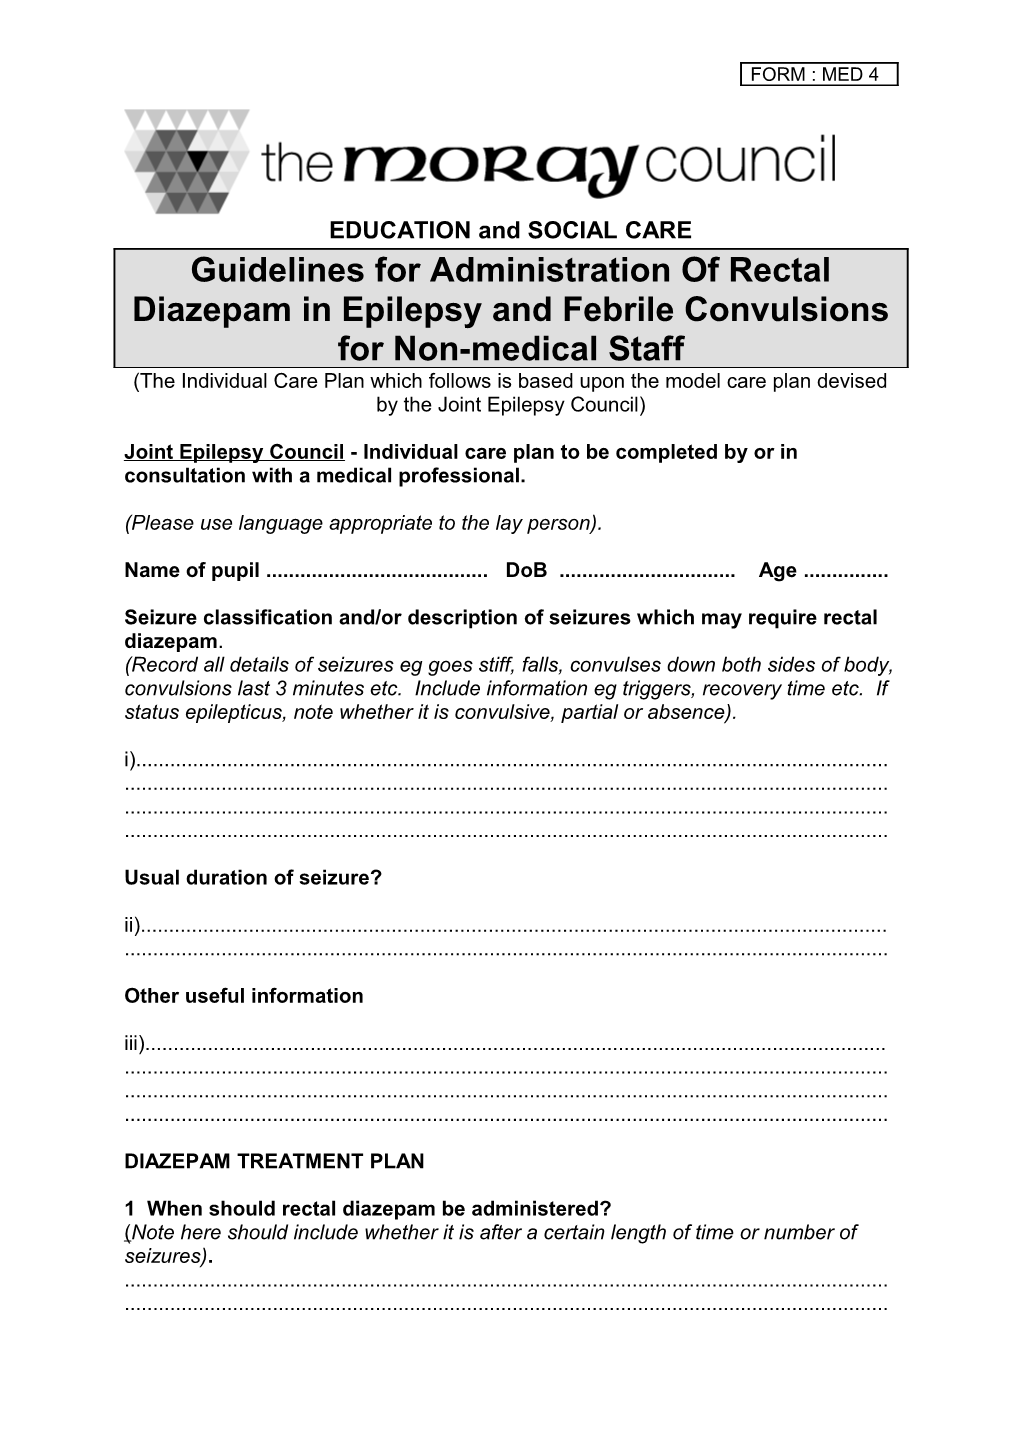 Guidelines for Administration of Rectal Diazepam in Epilepsy and Febrile Convulsions For